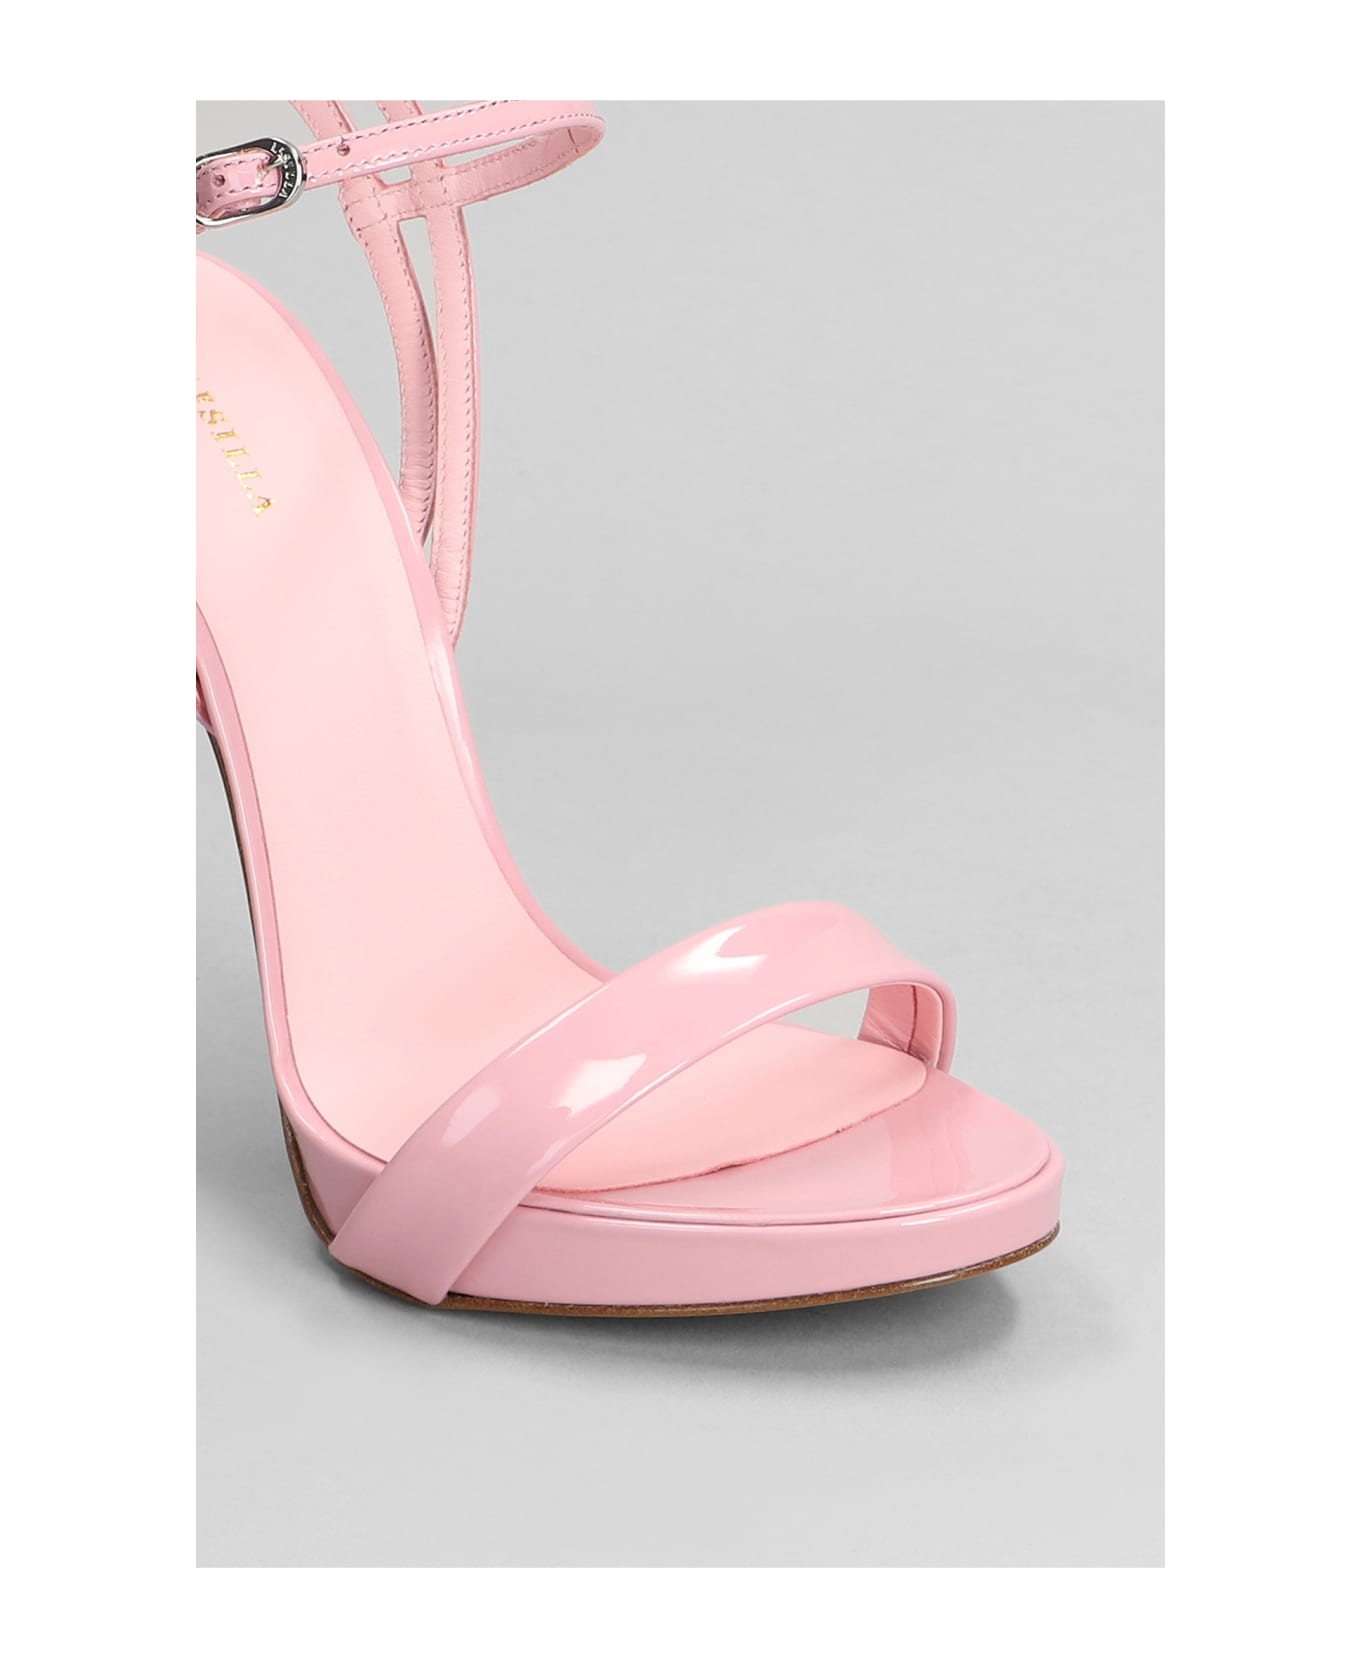 Le Silla Gwen Sandals In Rose-pink Patent Leather - rose-pink